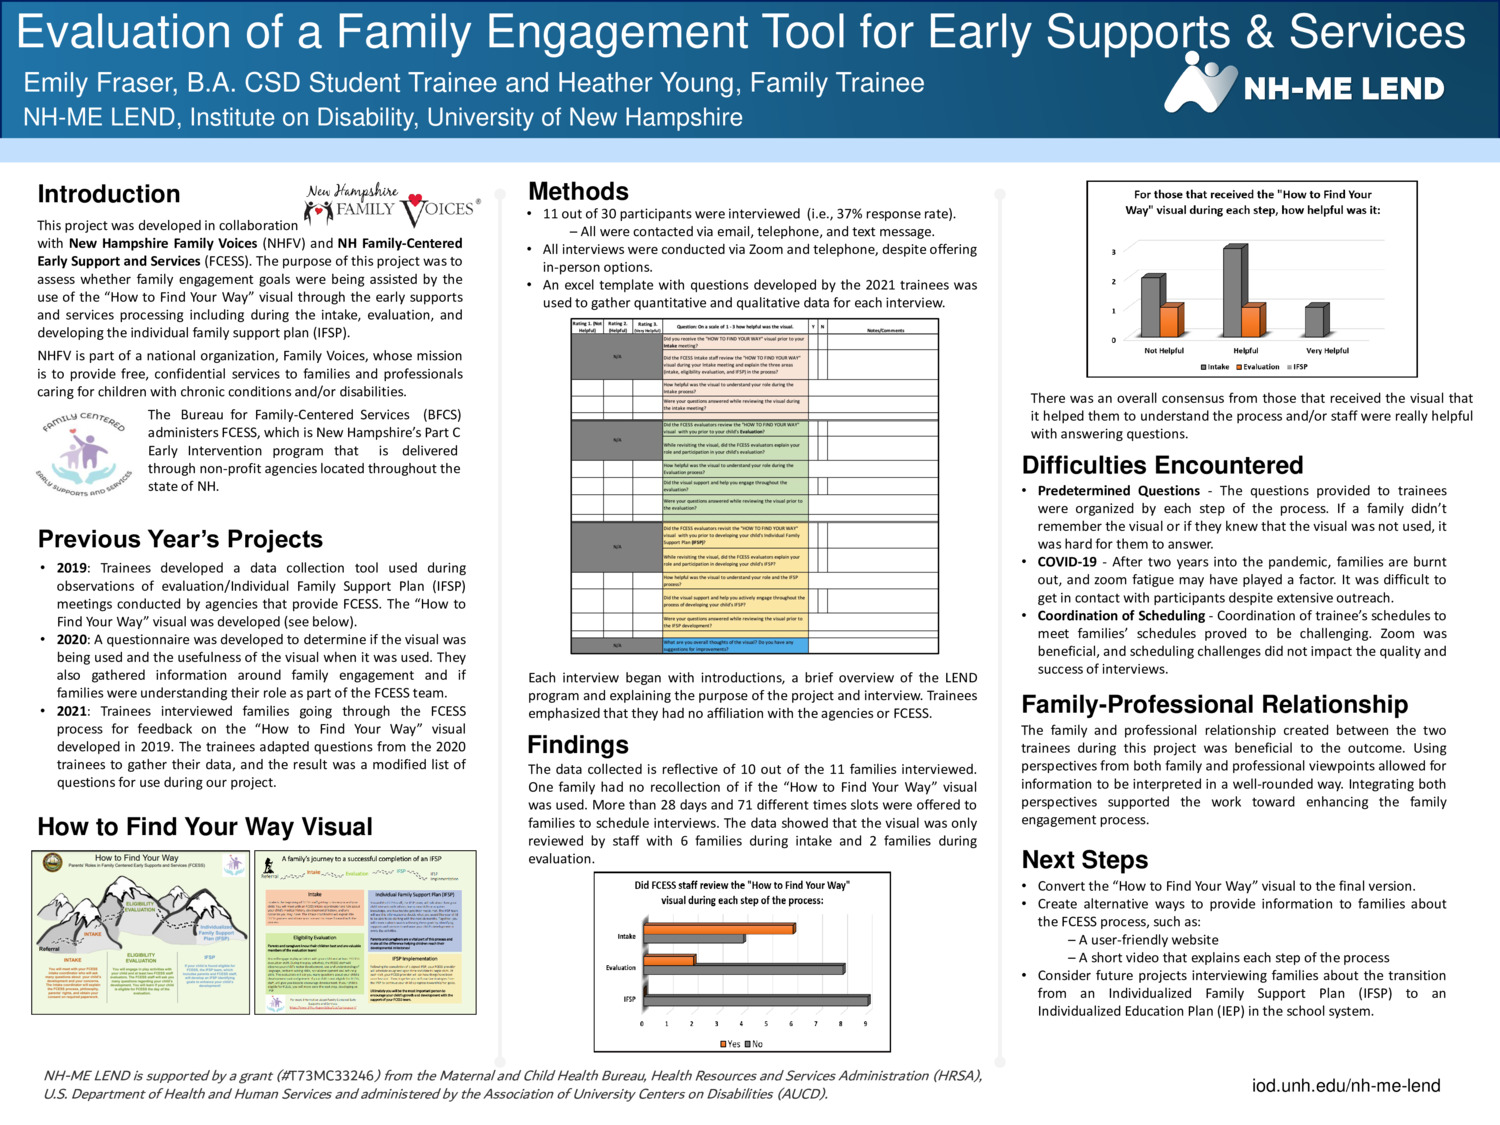 Evaluation Of A Family Engagement Tool For Early Supports & Services by emf1081